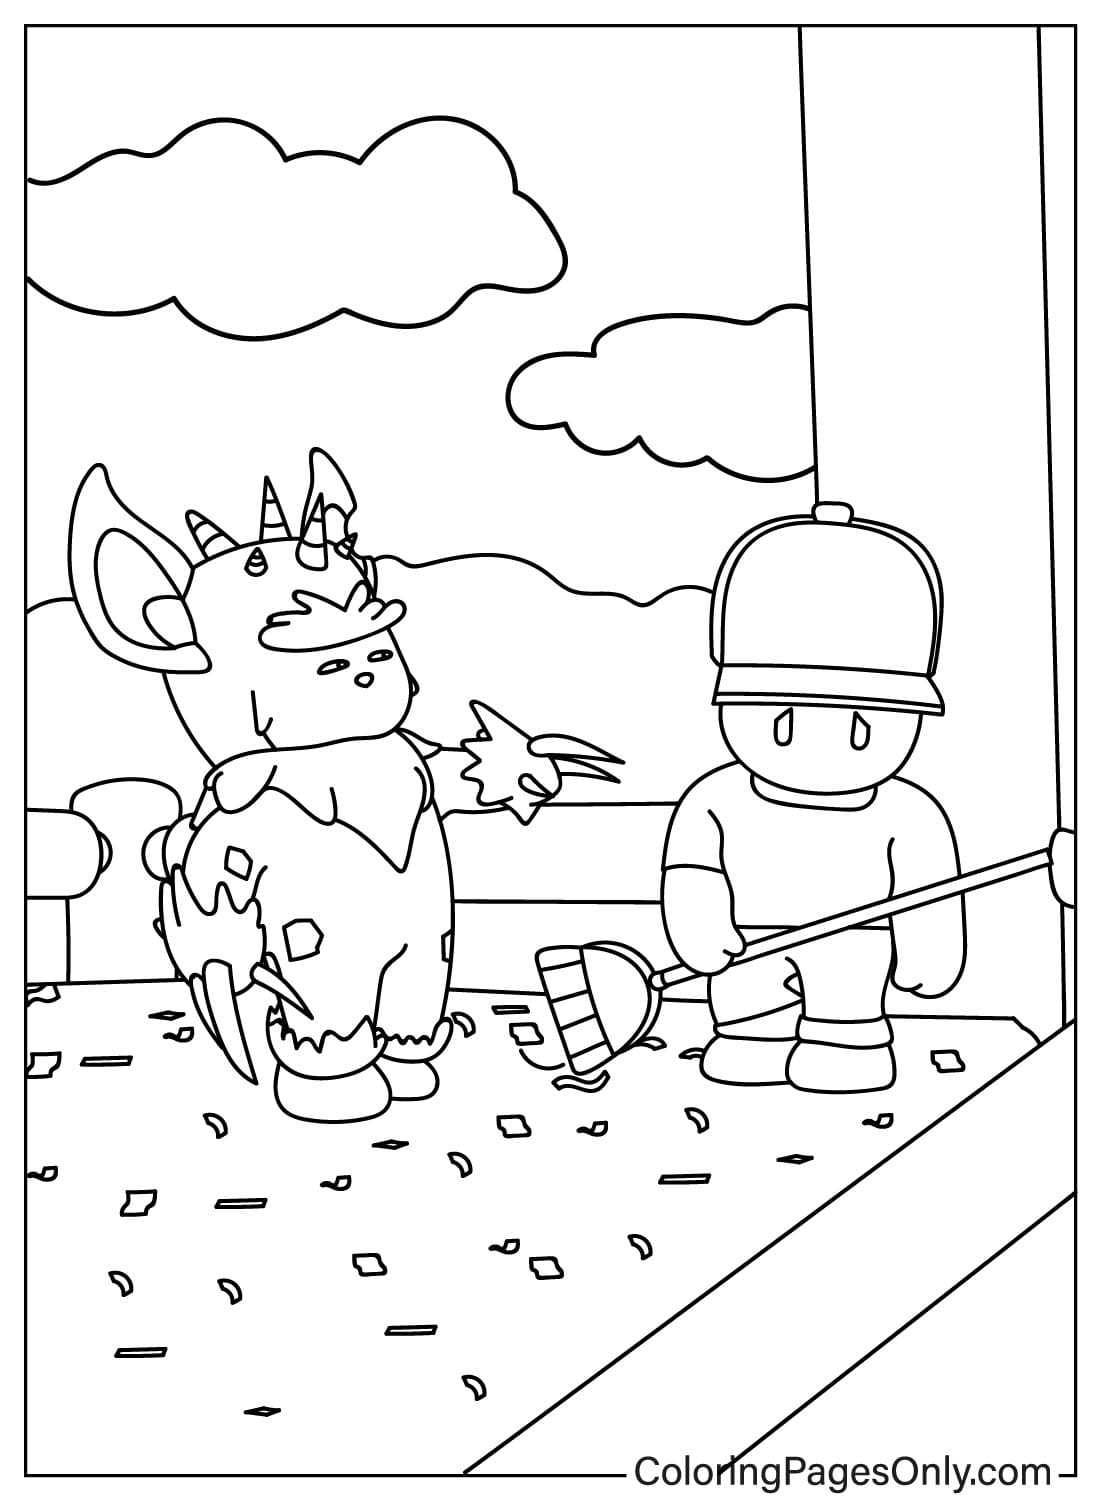 Stumble Guys Coloring Page JPG from Stumble Guys